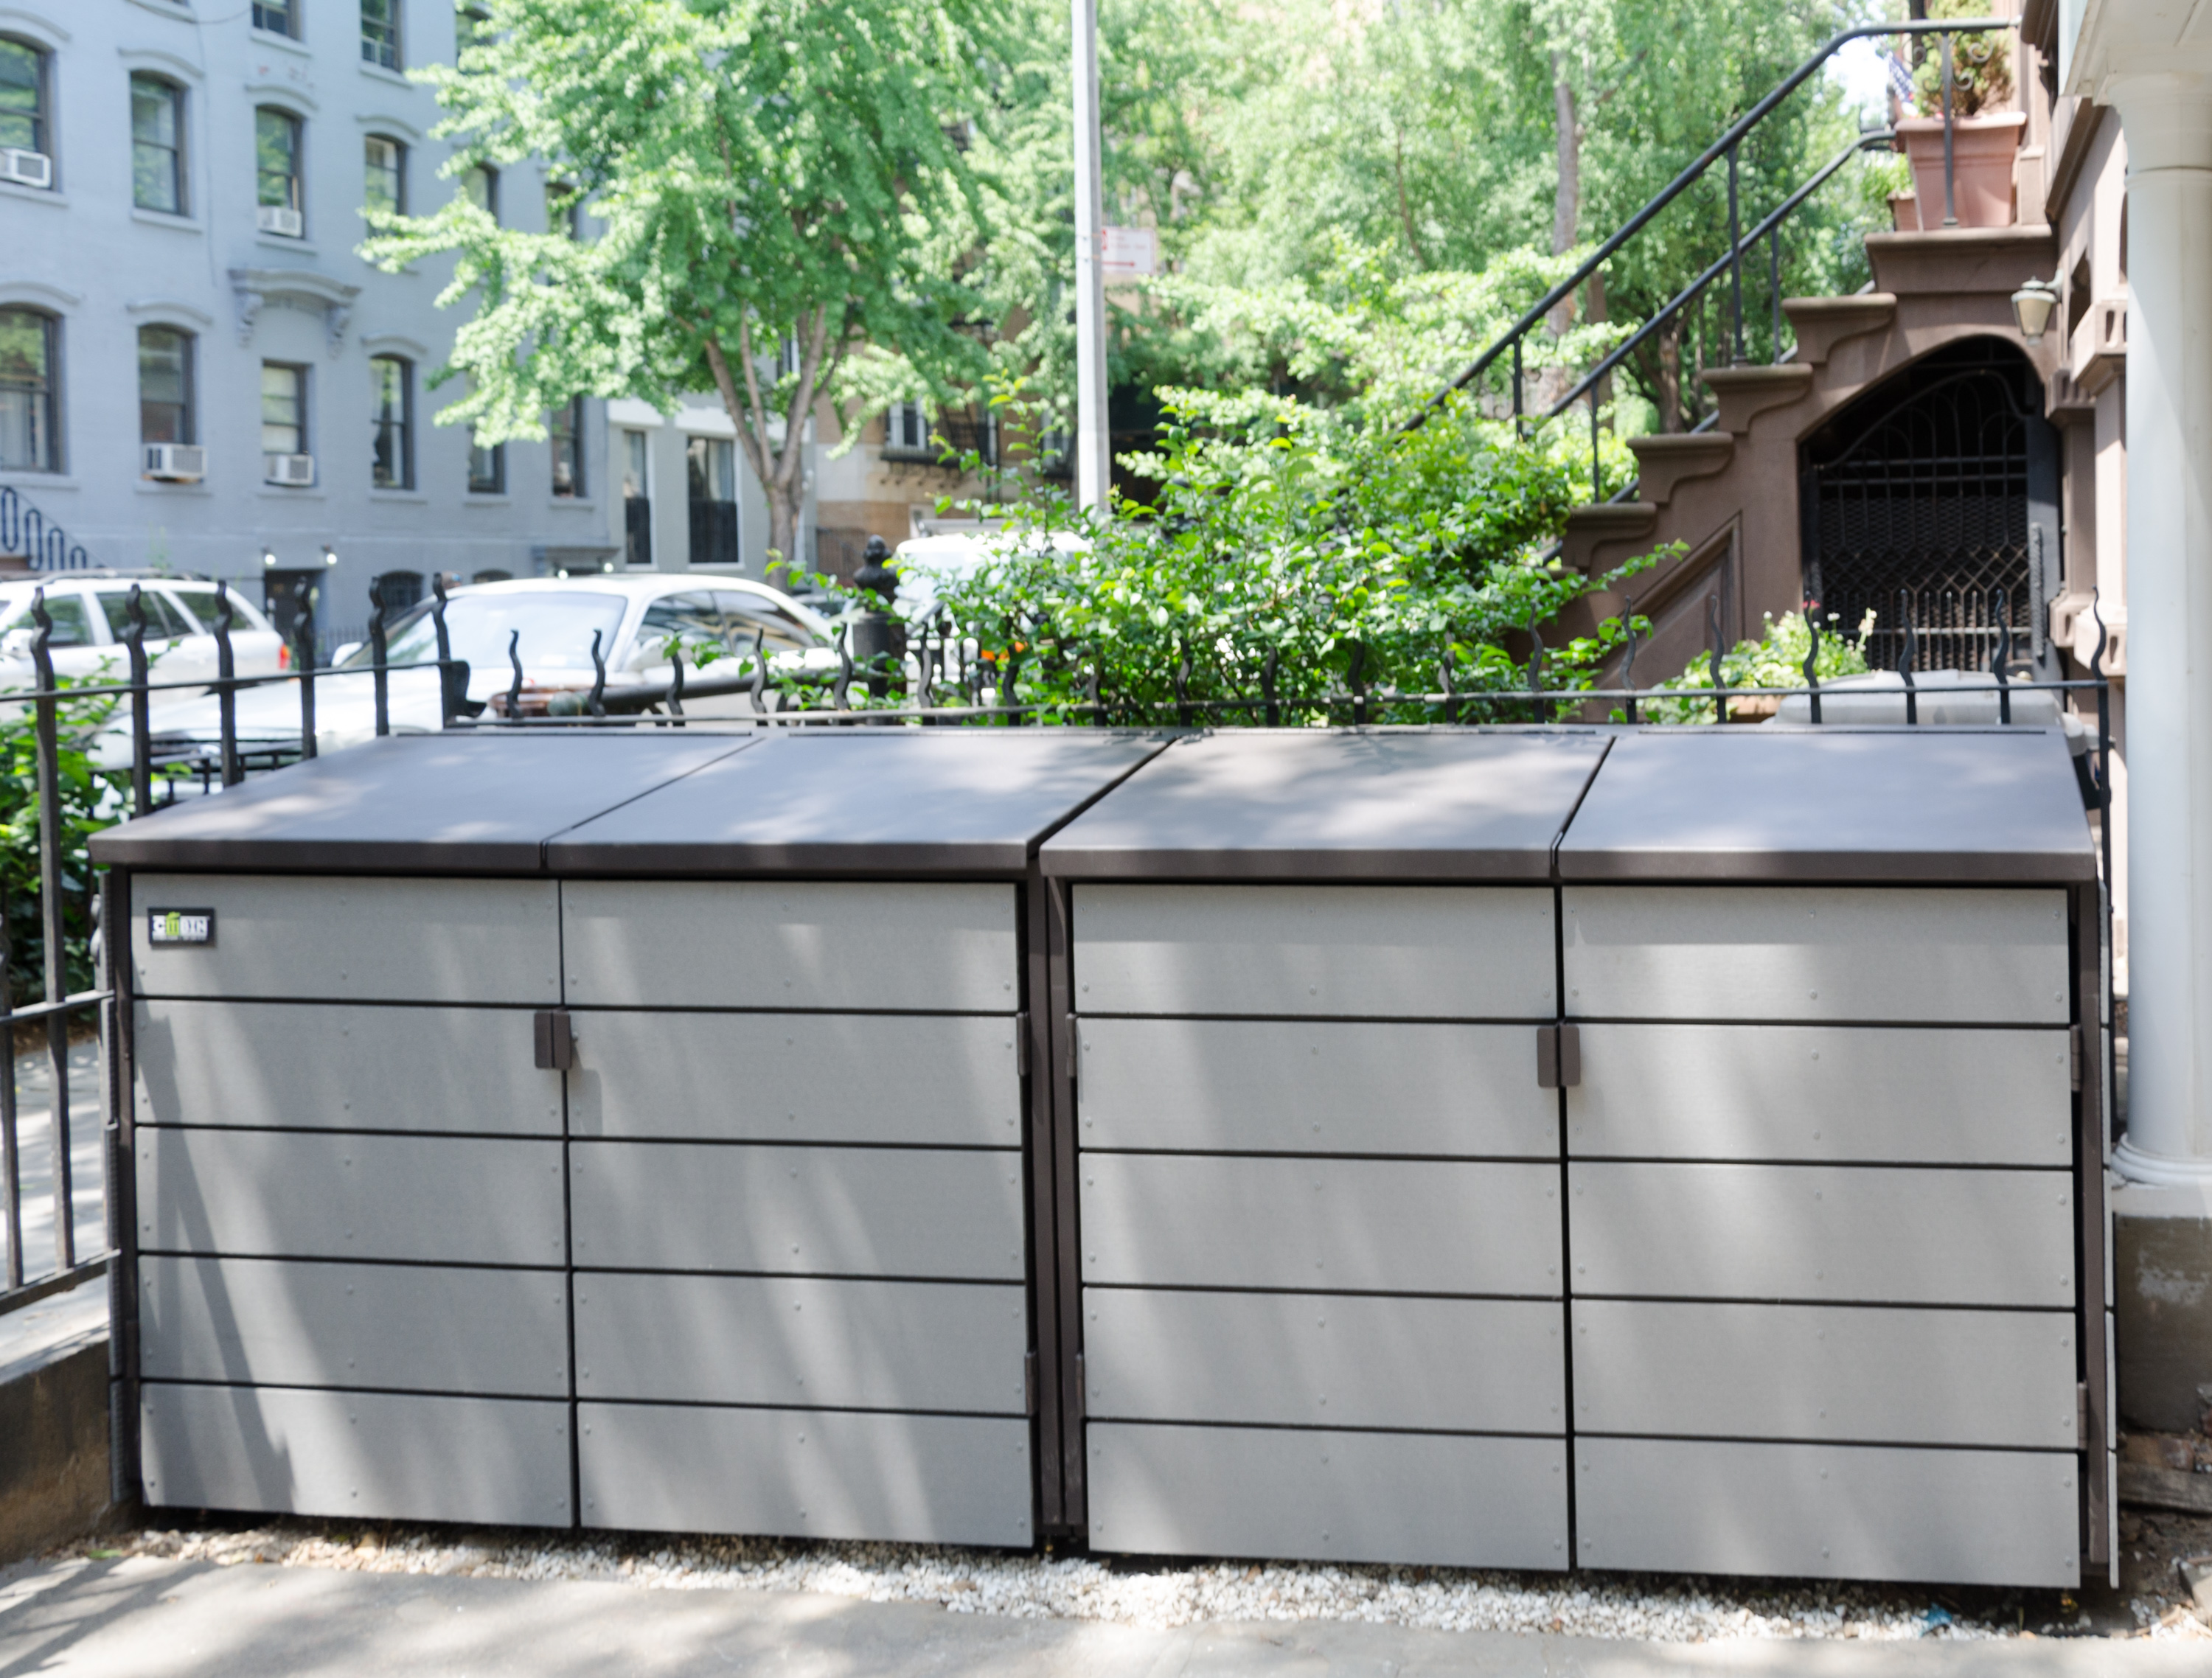 Rat Proof Trash Can Enclosures From CITIBIN